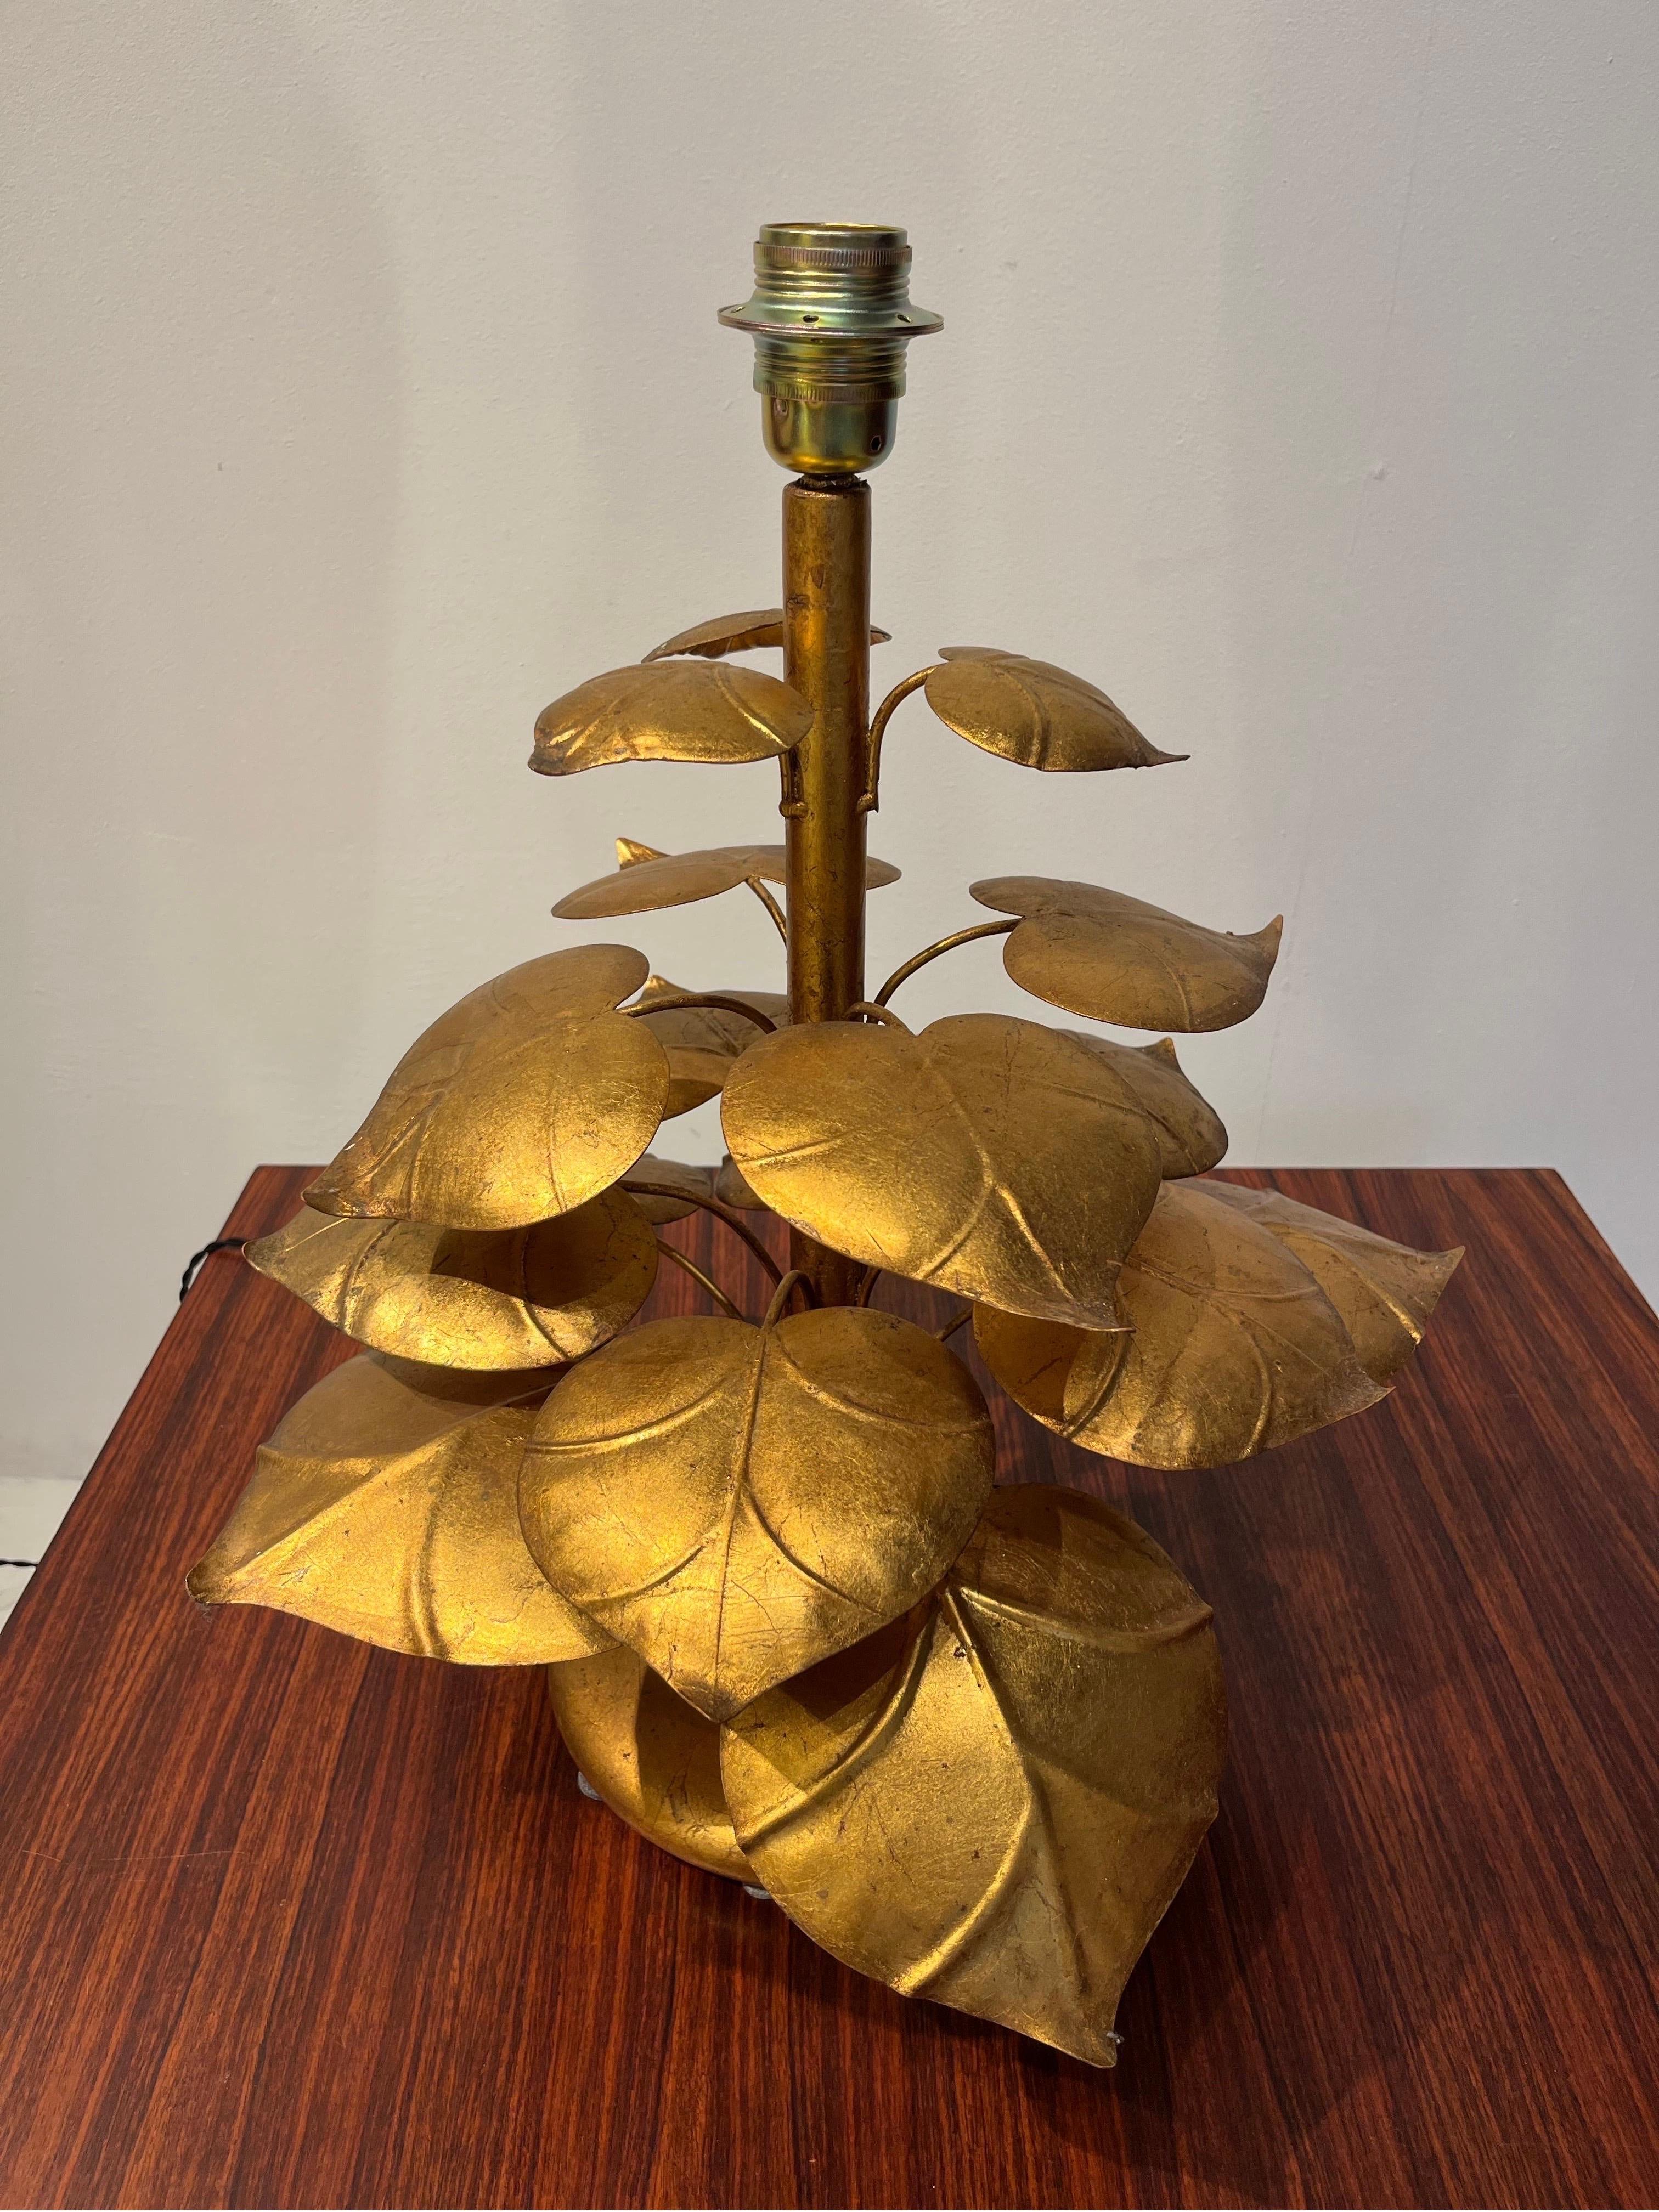 The lamp is made of metal that was gilded. It imitates the vegetal world in order to look like a decorative plant. Please note that the size of the lamp without the shade is: Height 52cm; Base 23cm.